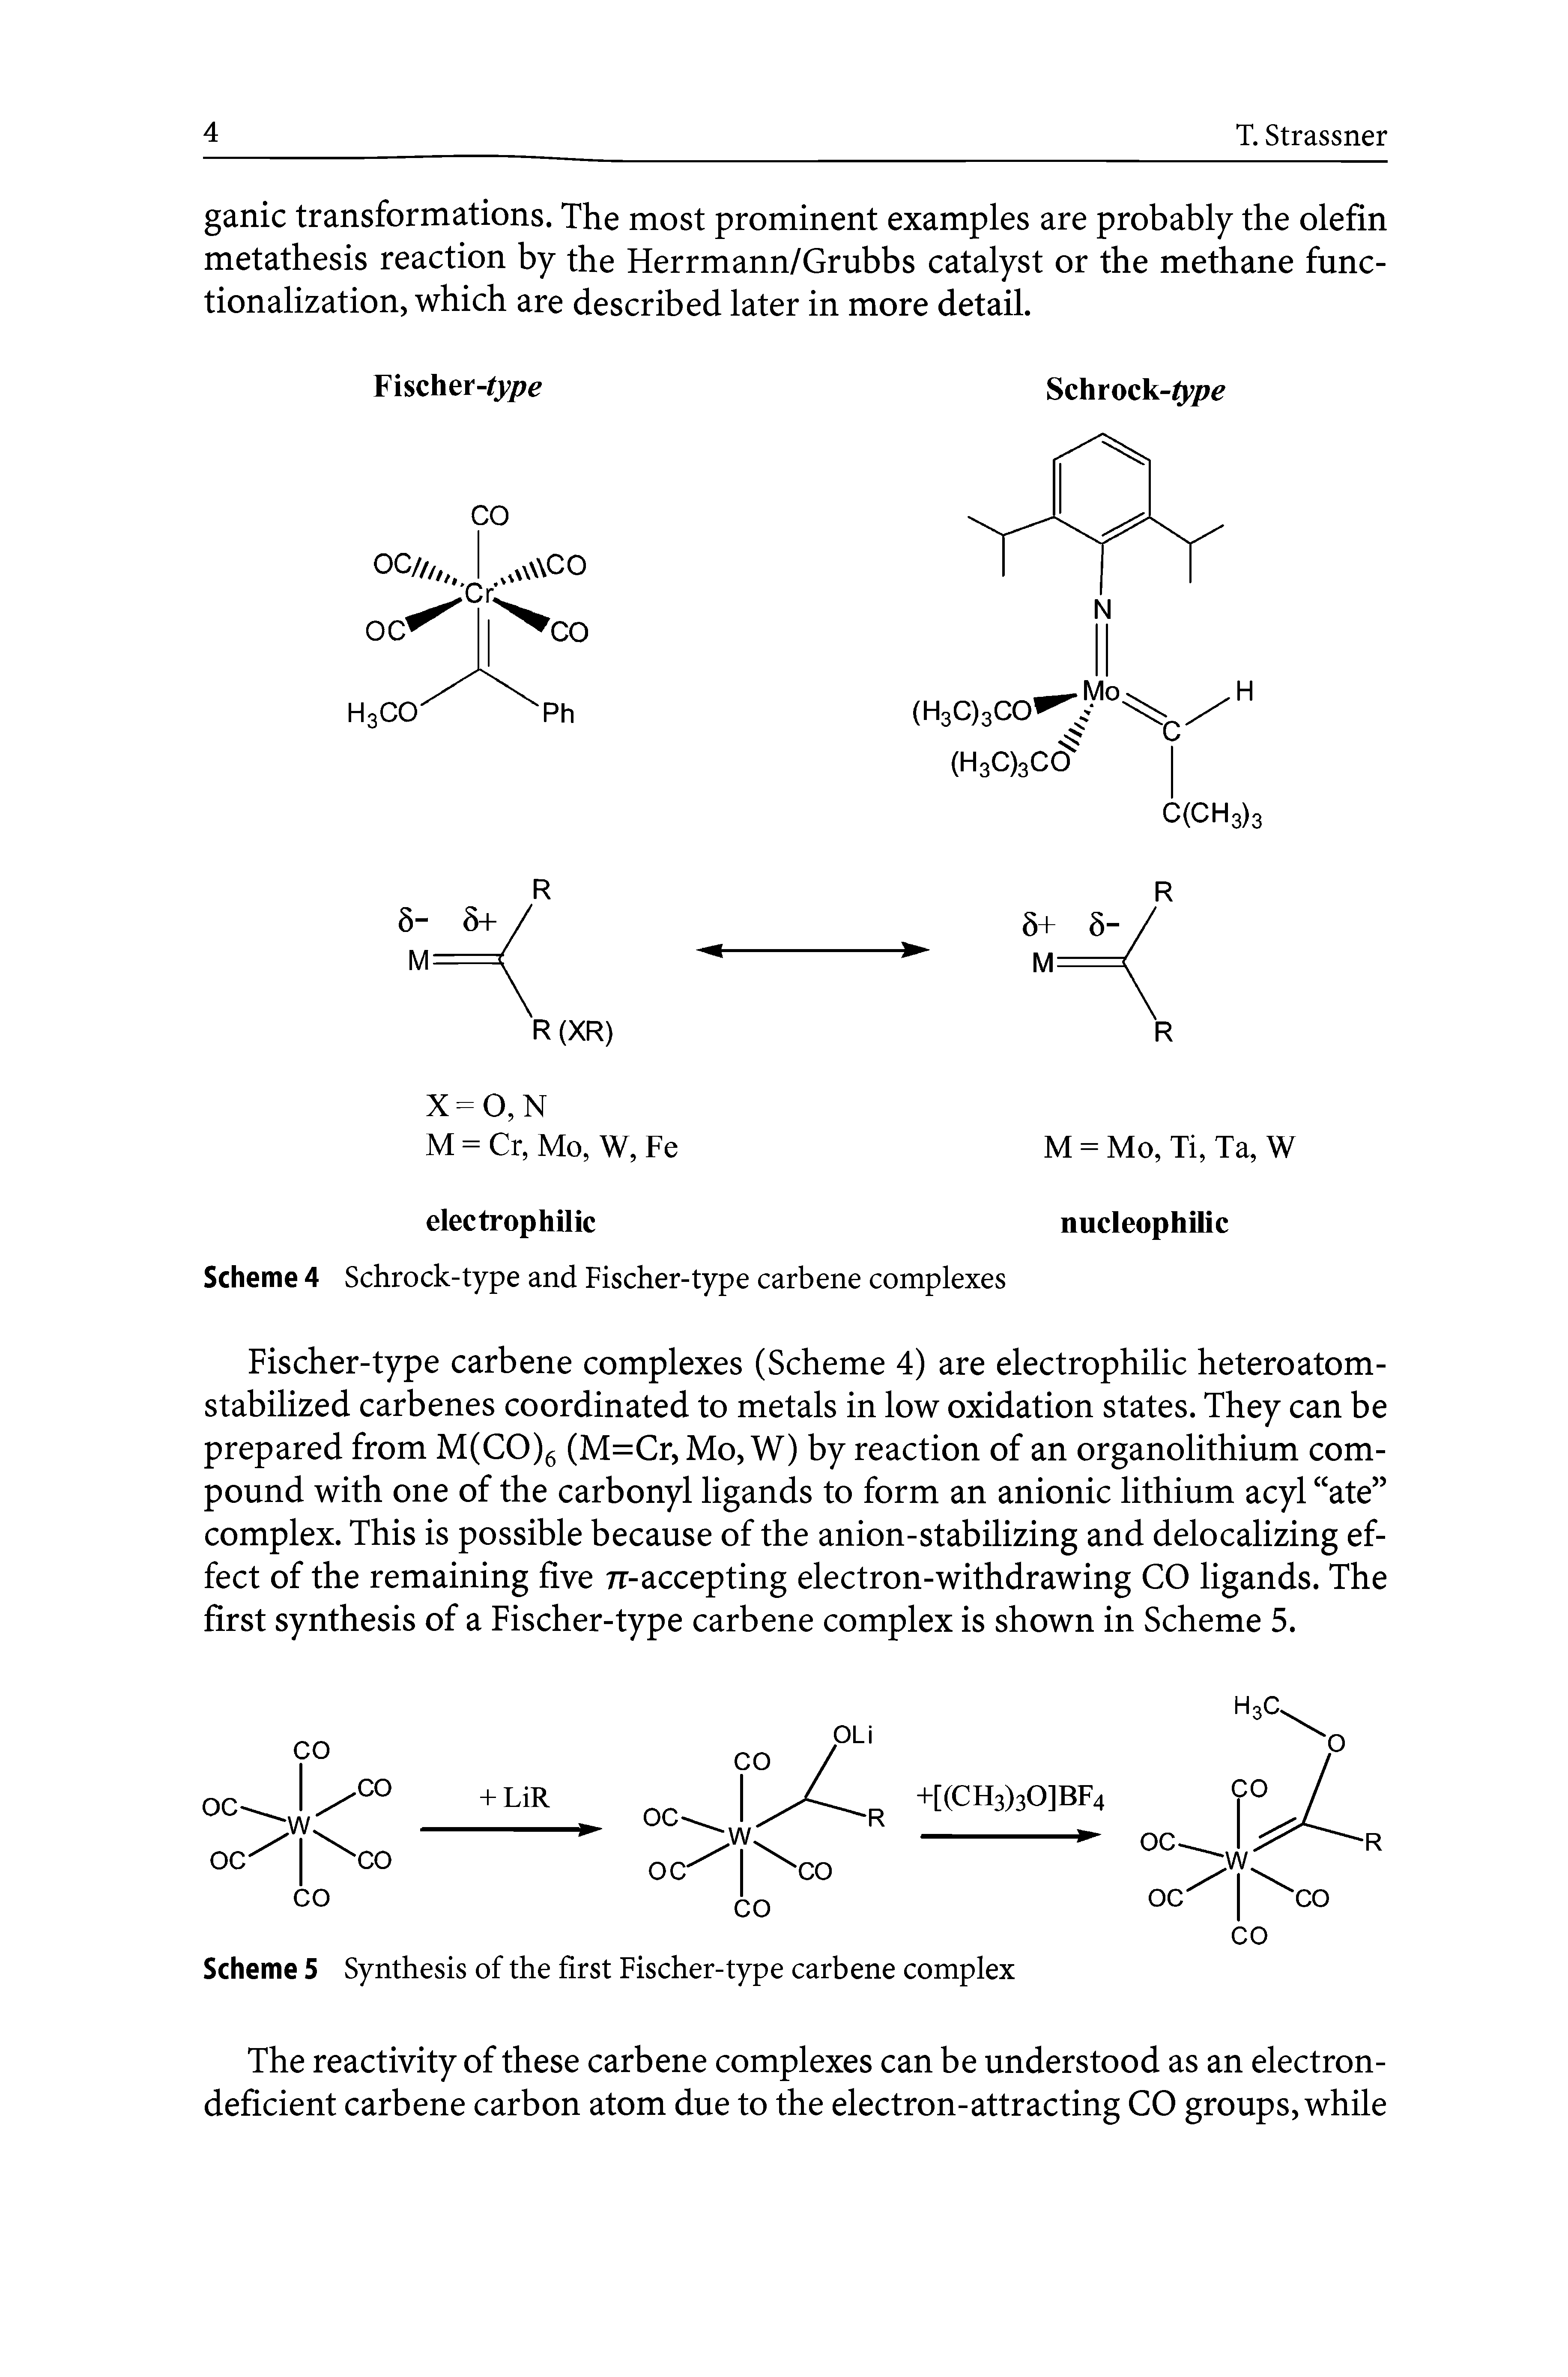 Scheme 5 Synthesis of the first Fischer-type carbene complex...